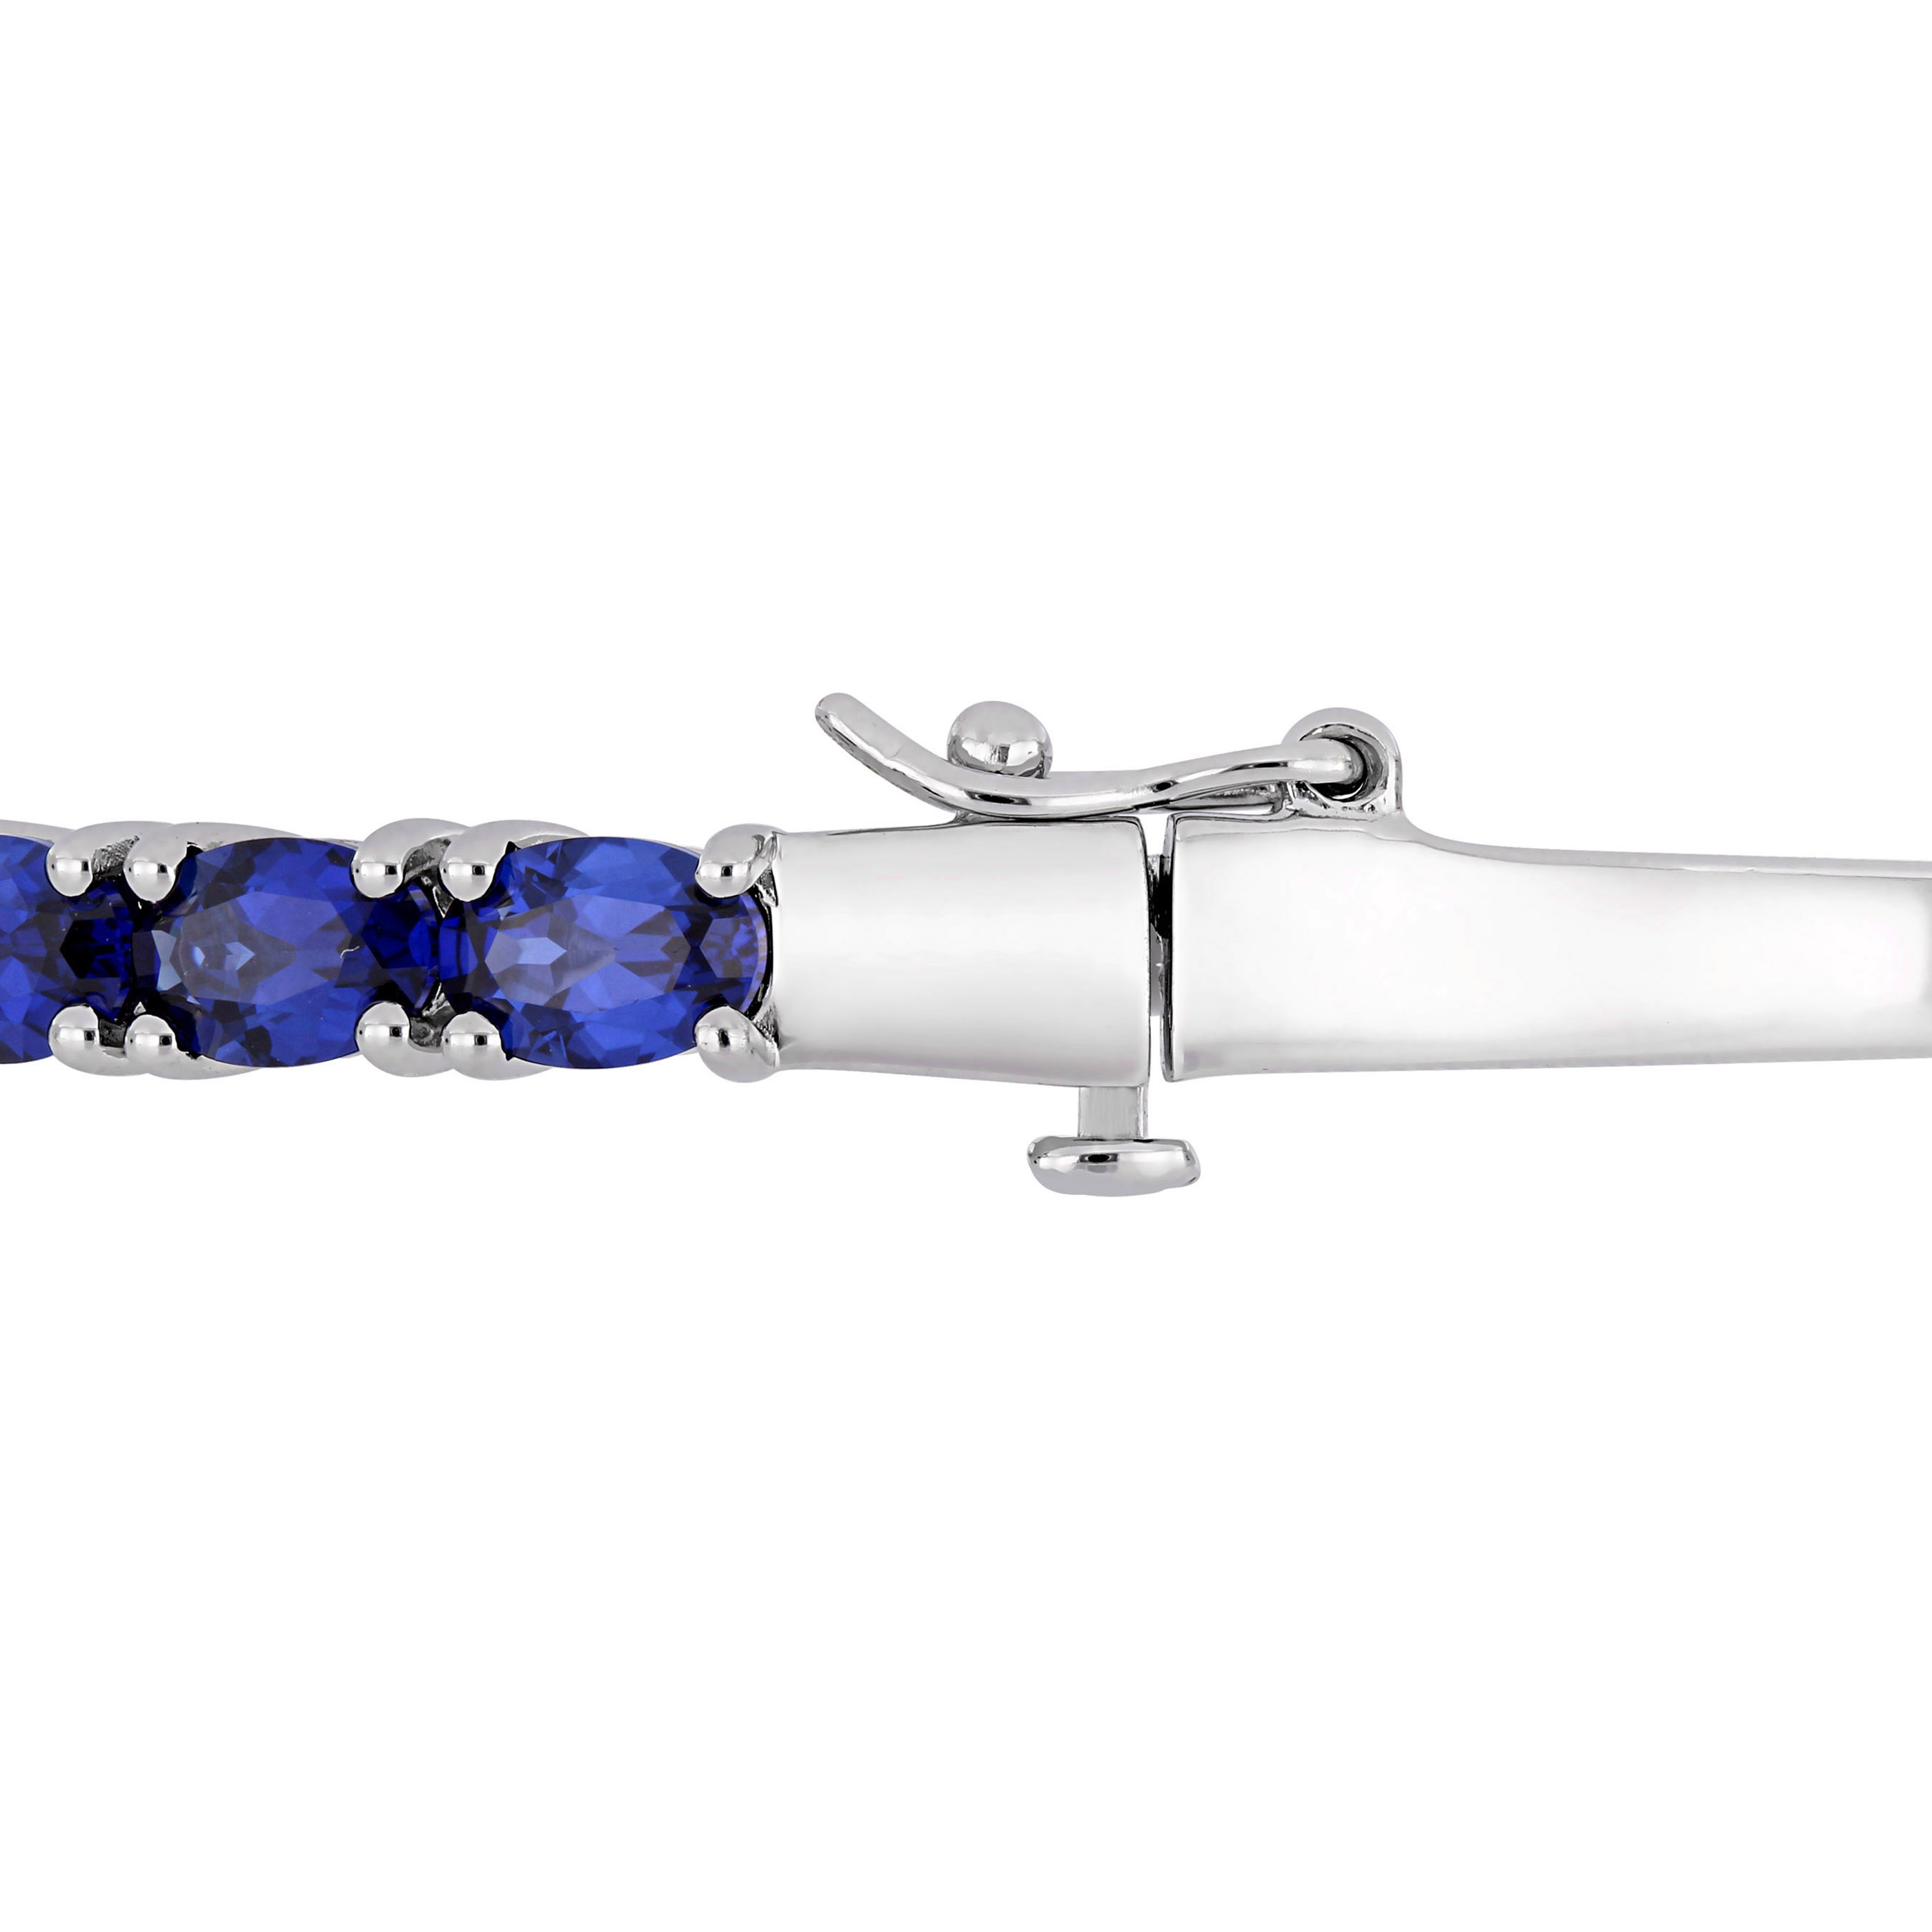 8 1/4 CT TGW Oval-Cut Created Blue Sapphire Bangle in Sterling Silver - 7 in.